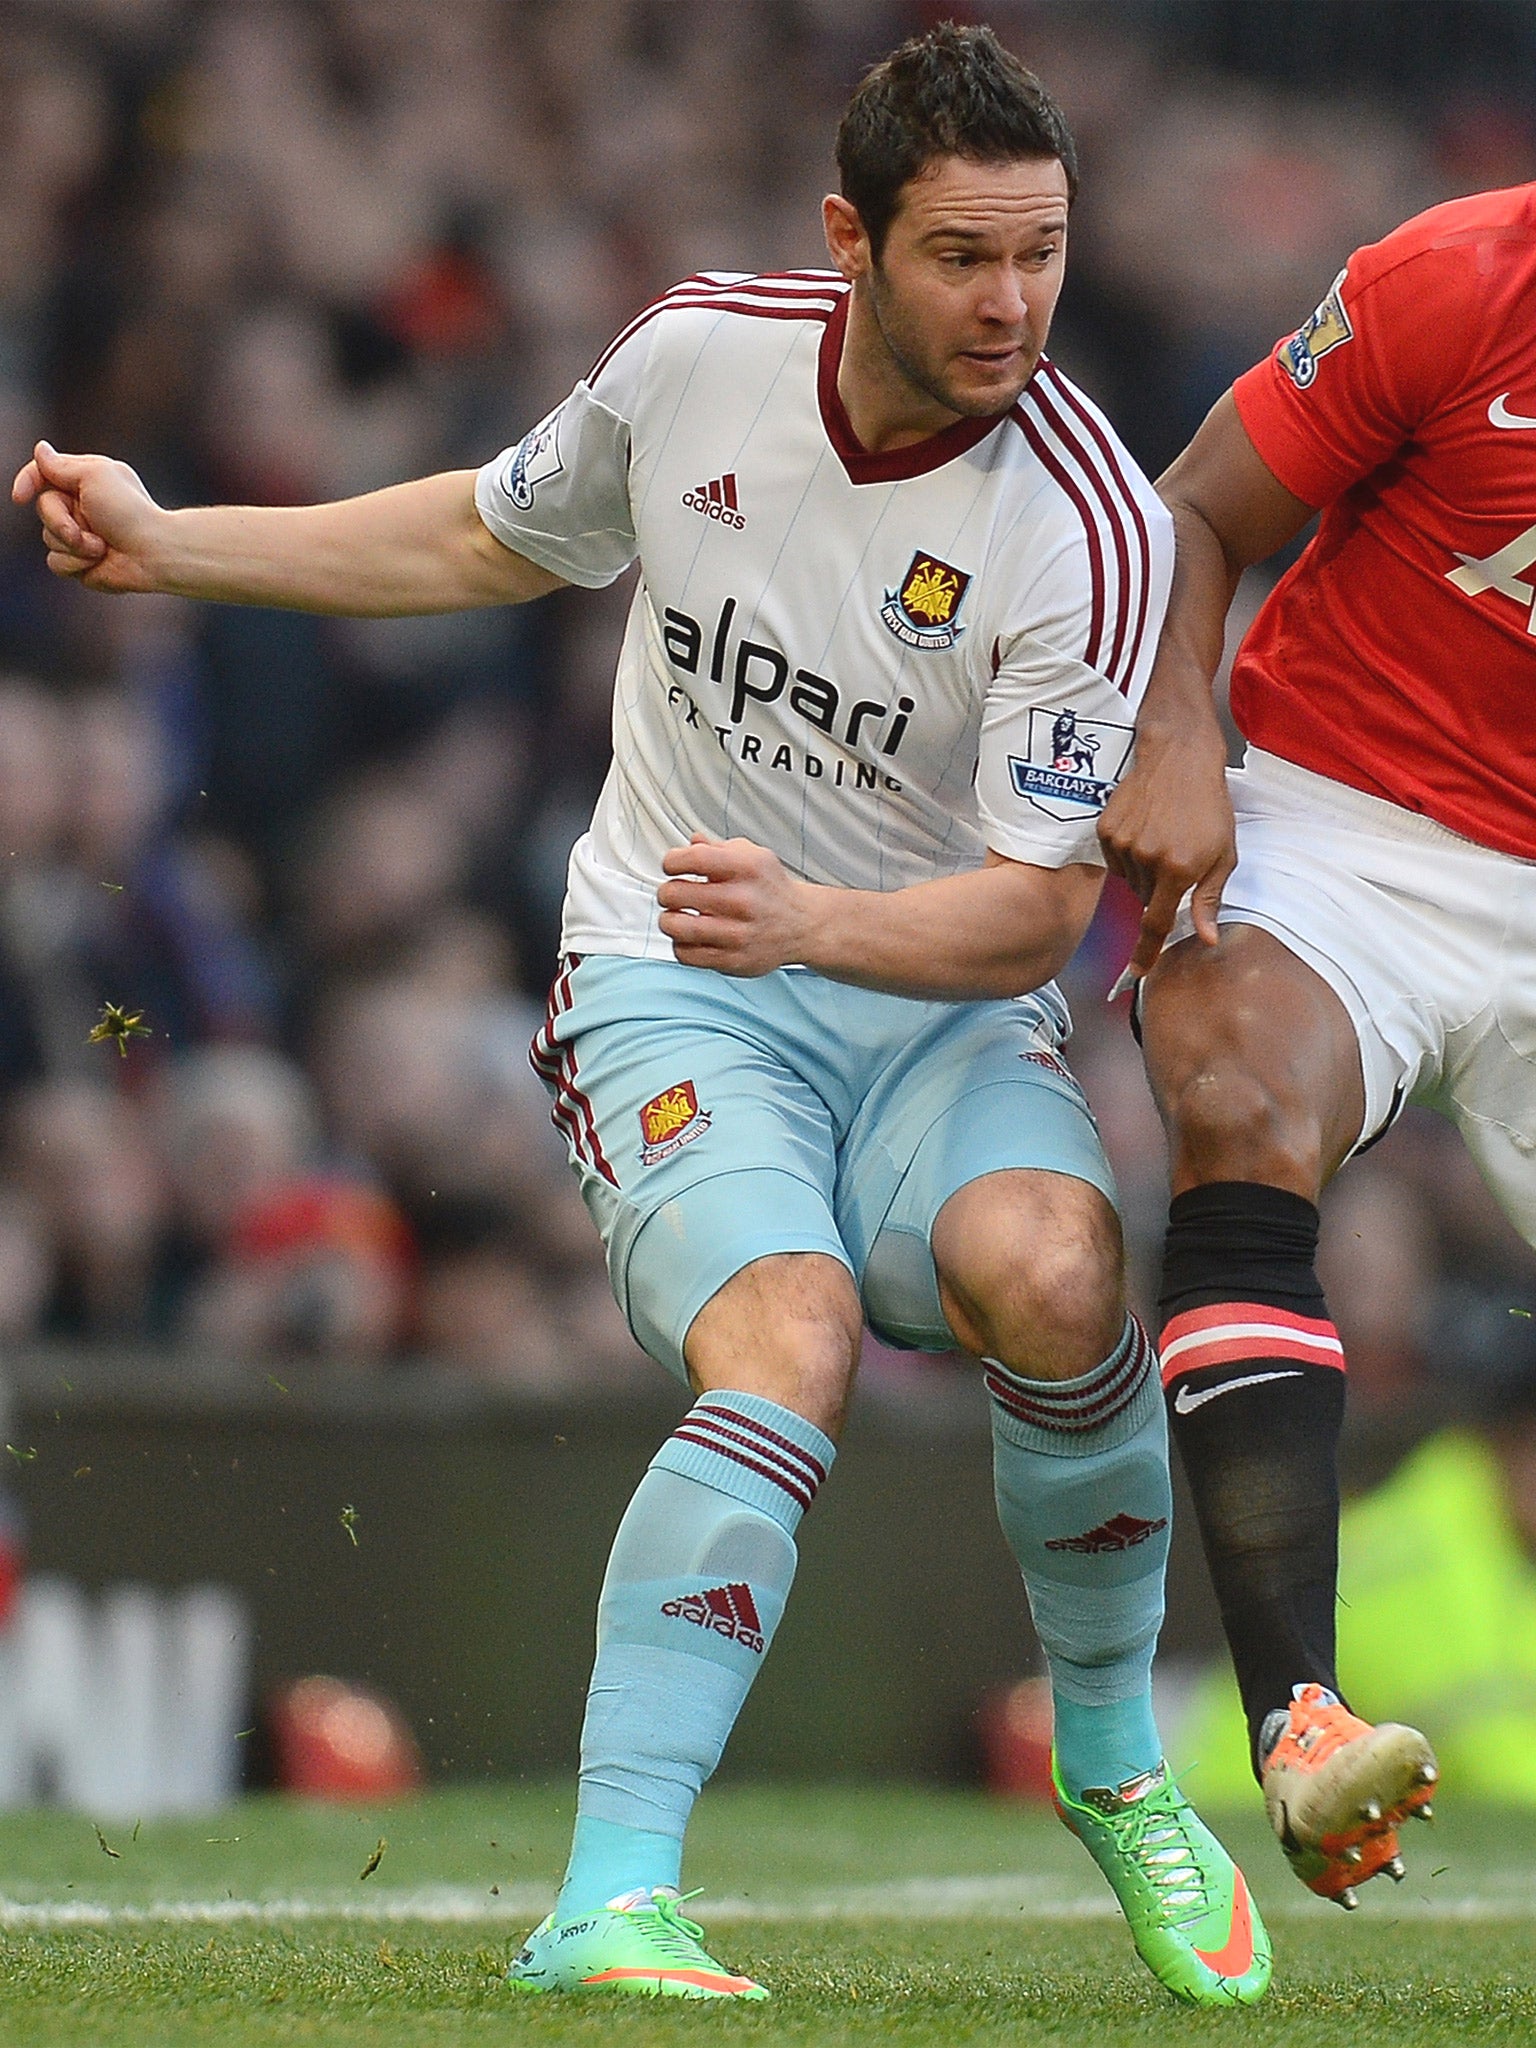 Matt Jarvis was criticised for not going down when fouled